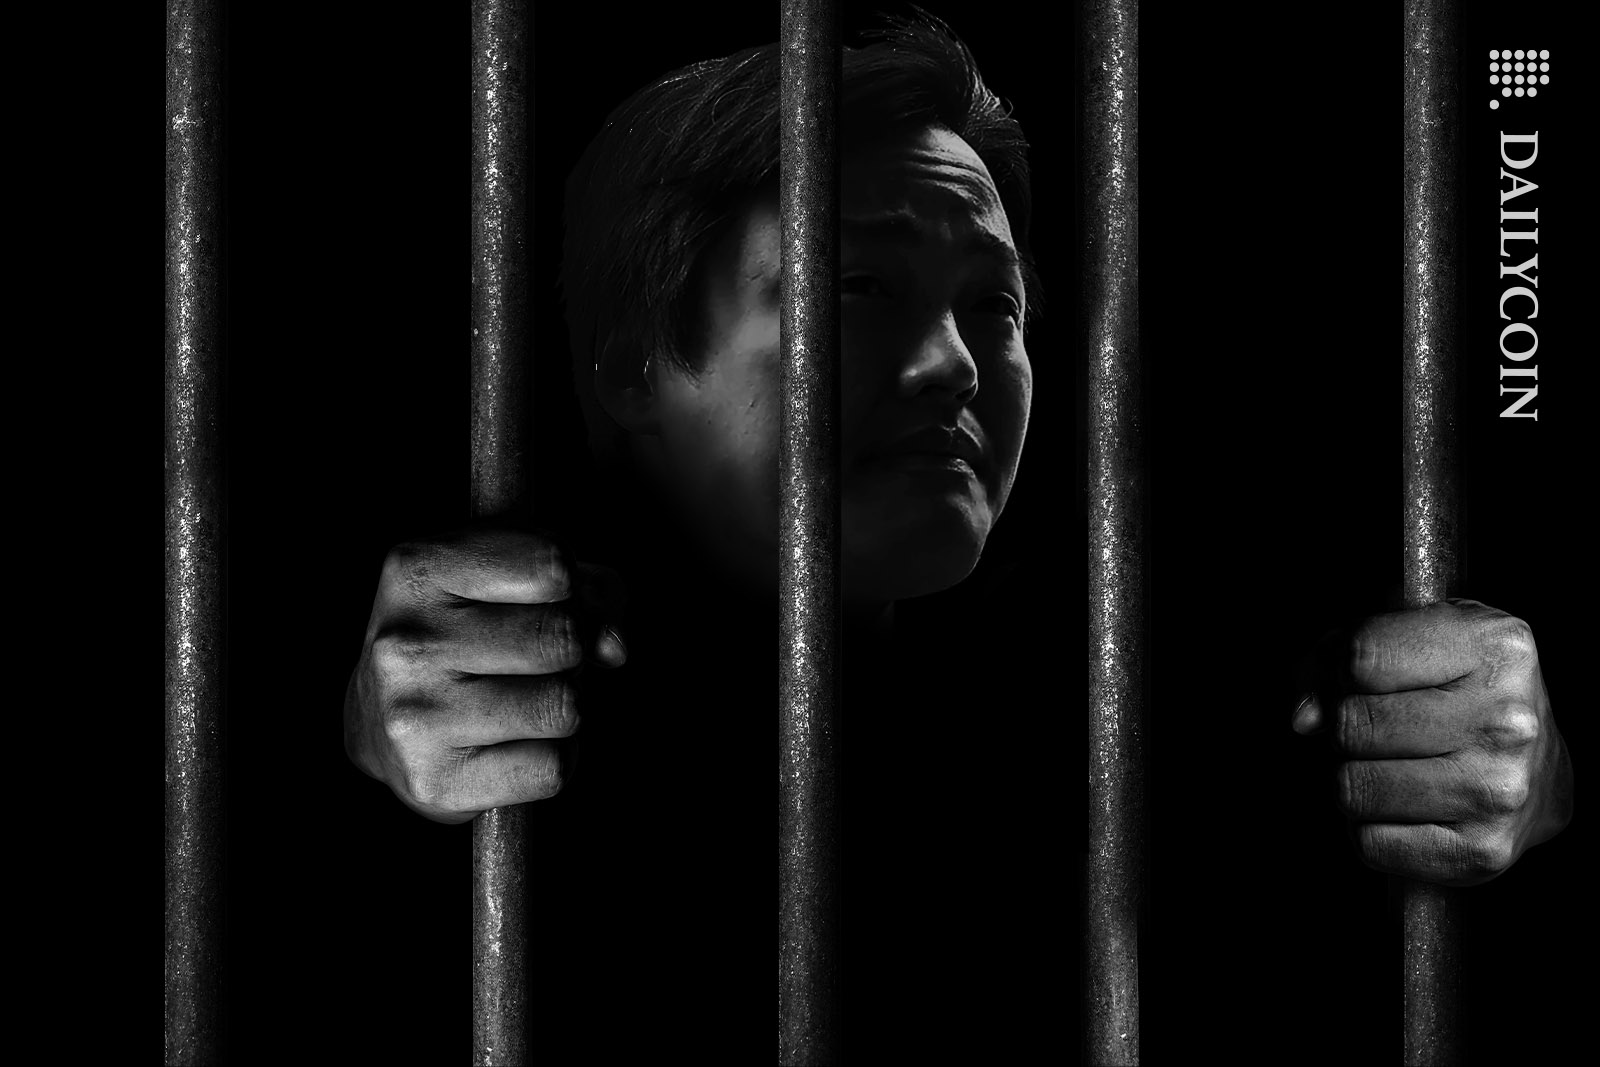 Do Kwon crying in a dark prison cell.